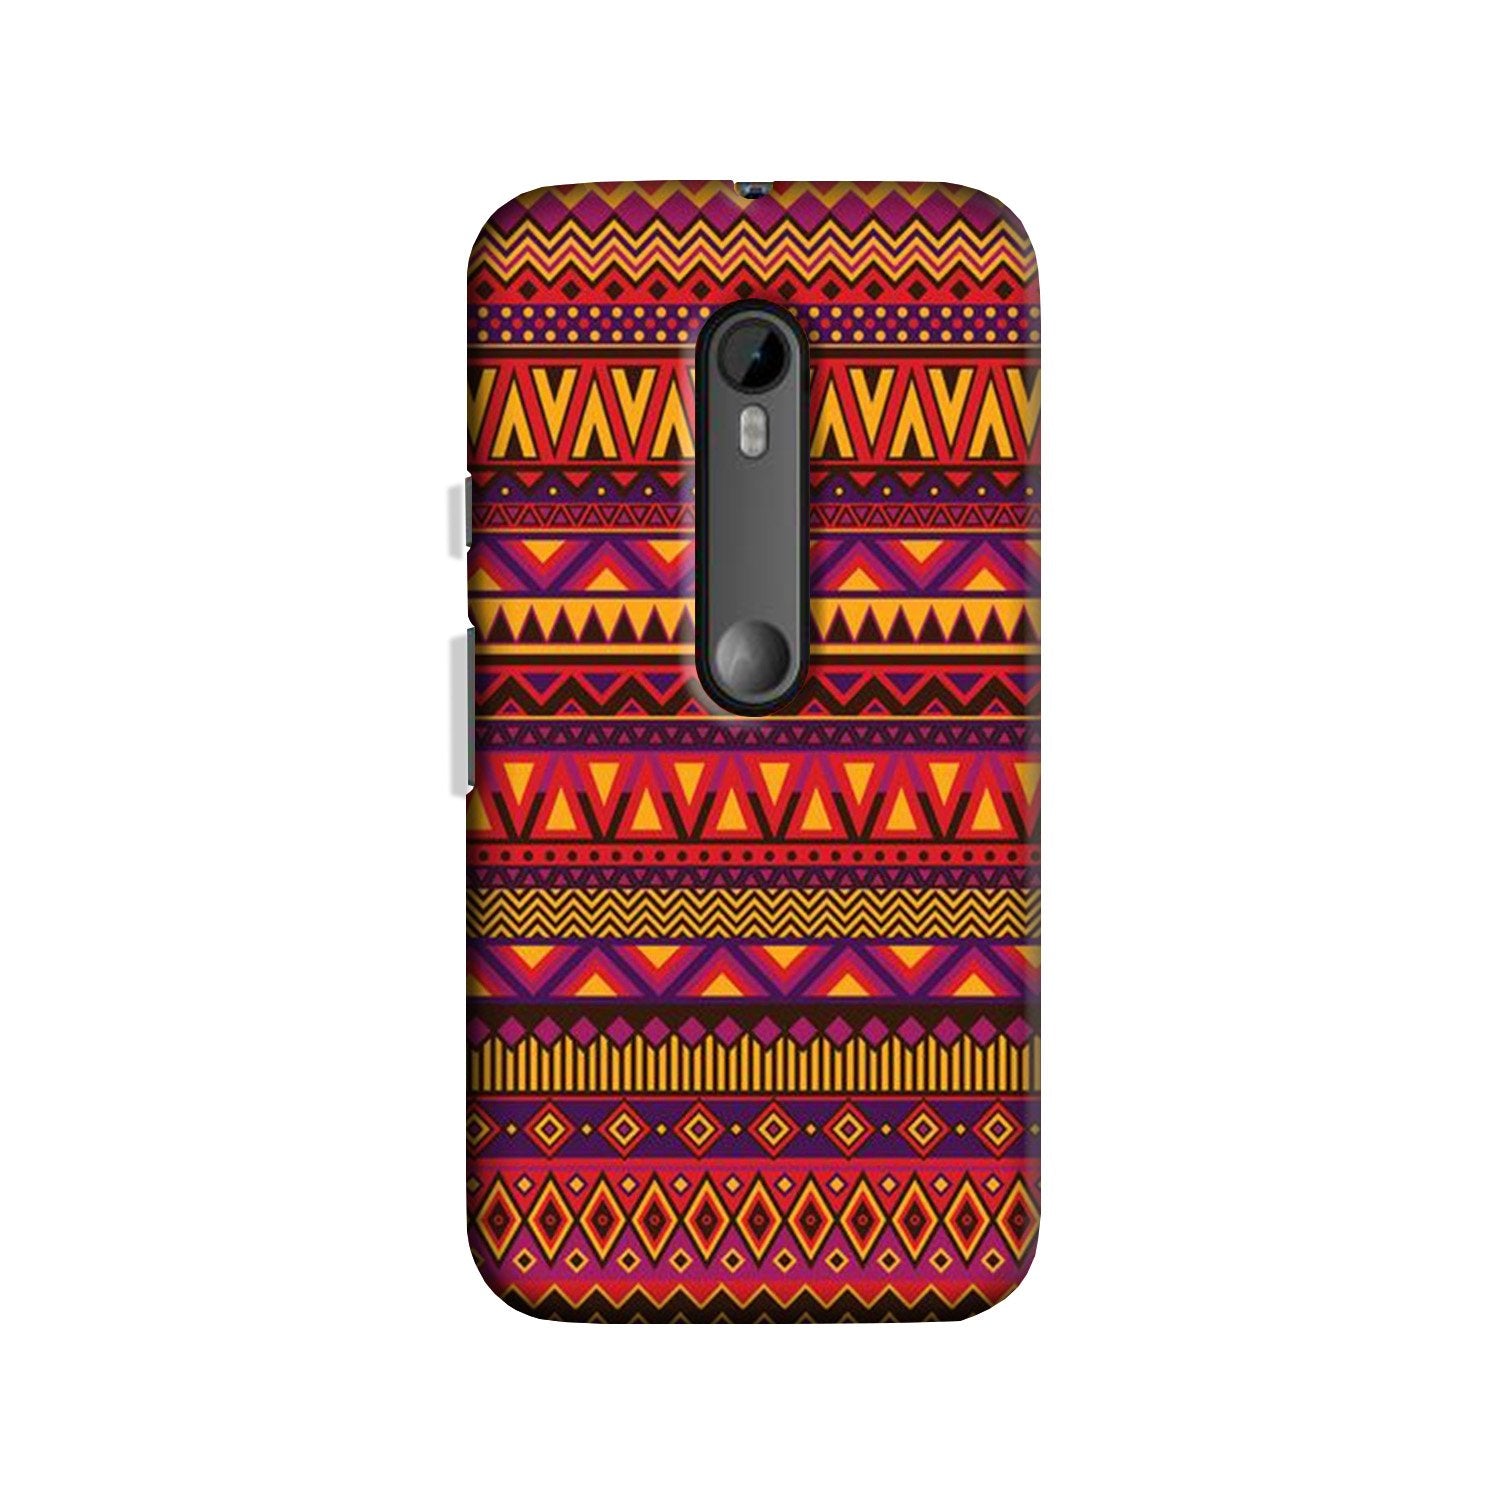 Zigzag line pattern2 Case for Moto X Play